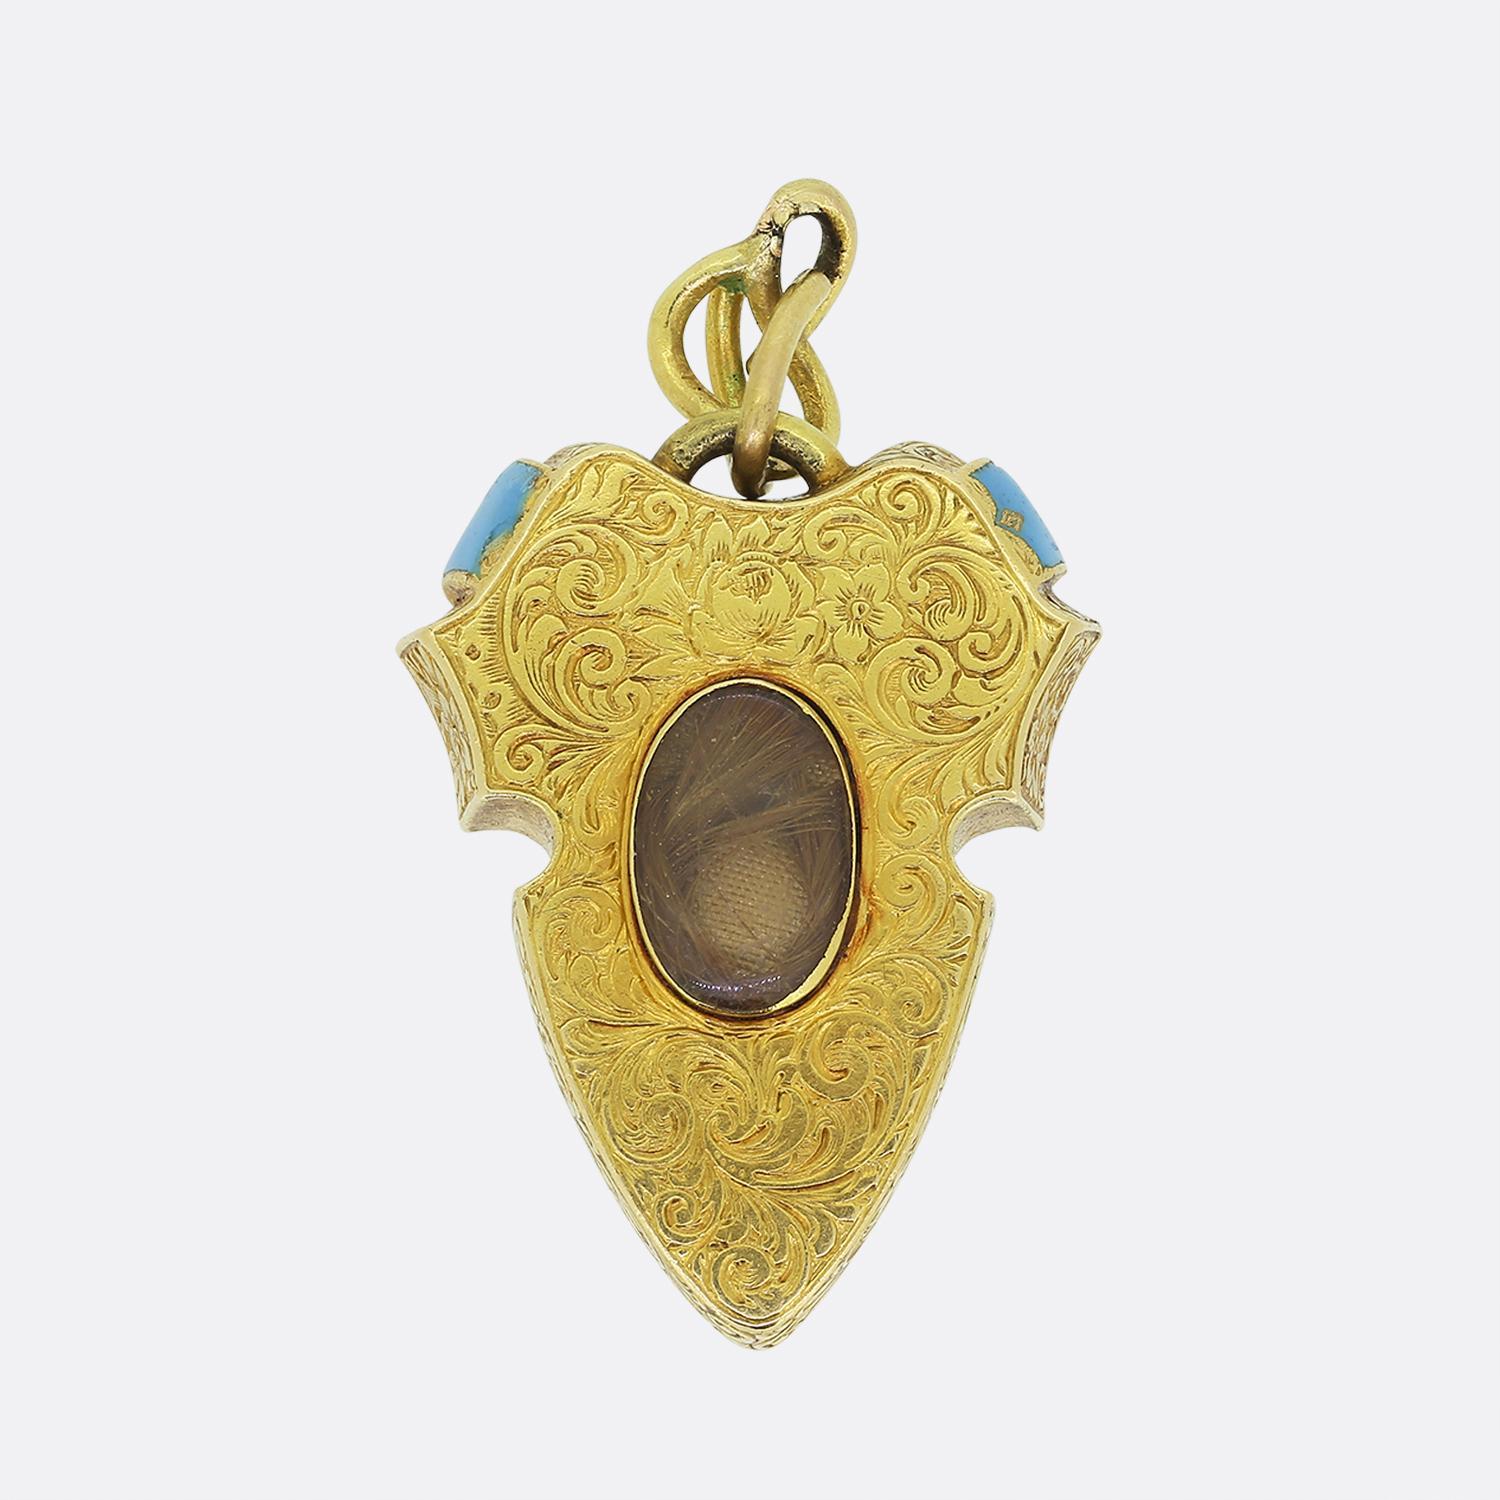 Here we have a remarkable creation taken from the Victorian era. This unique antique pendant has been crafted from a rich 18ct yellow gold into the shape of a shield which plays host to a natural pearl and diamond set buckle motif. Rich sky blue